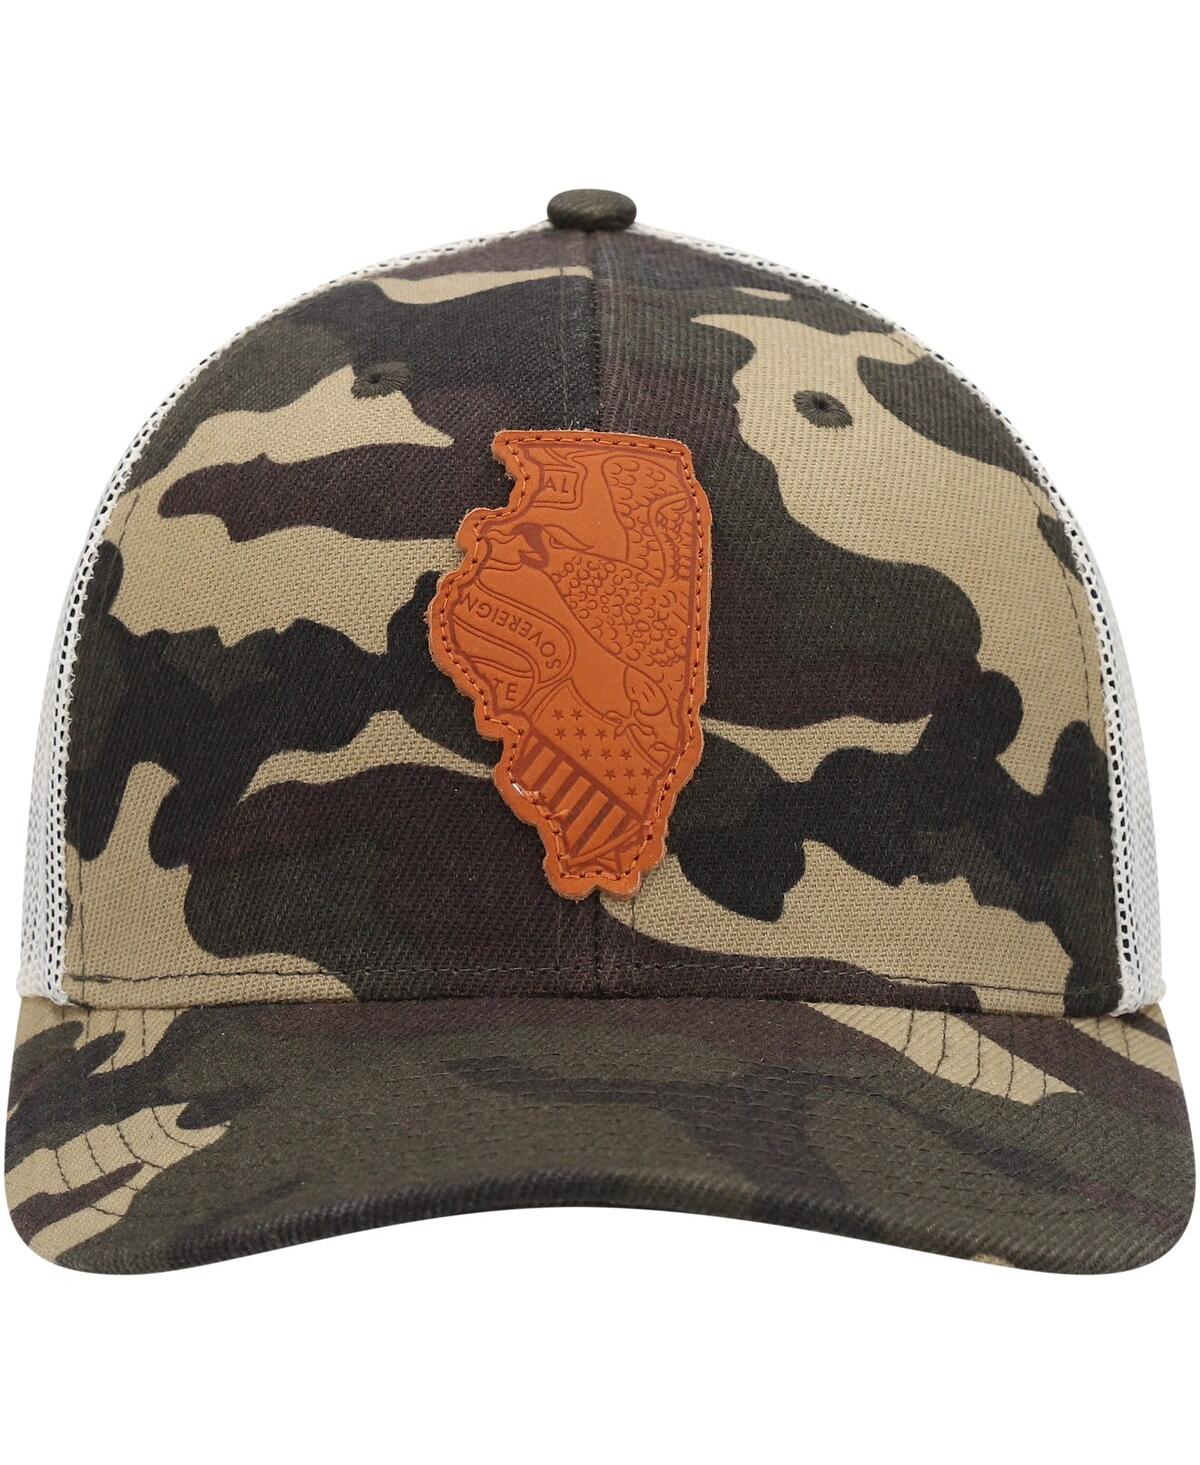 Shop Local Crowns Men's  Camo Illinois Icon Woodland State Patch Trucker Snapback Hat